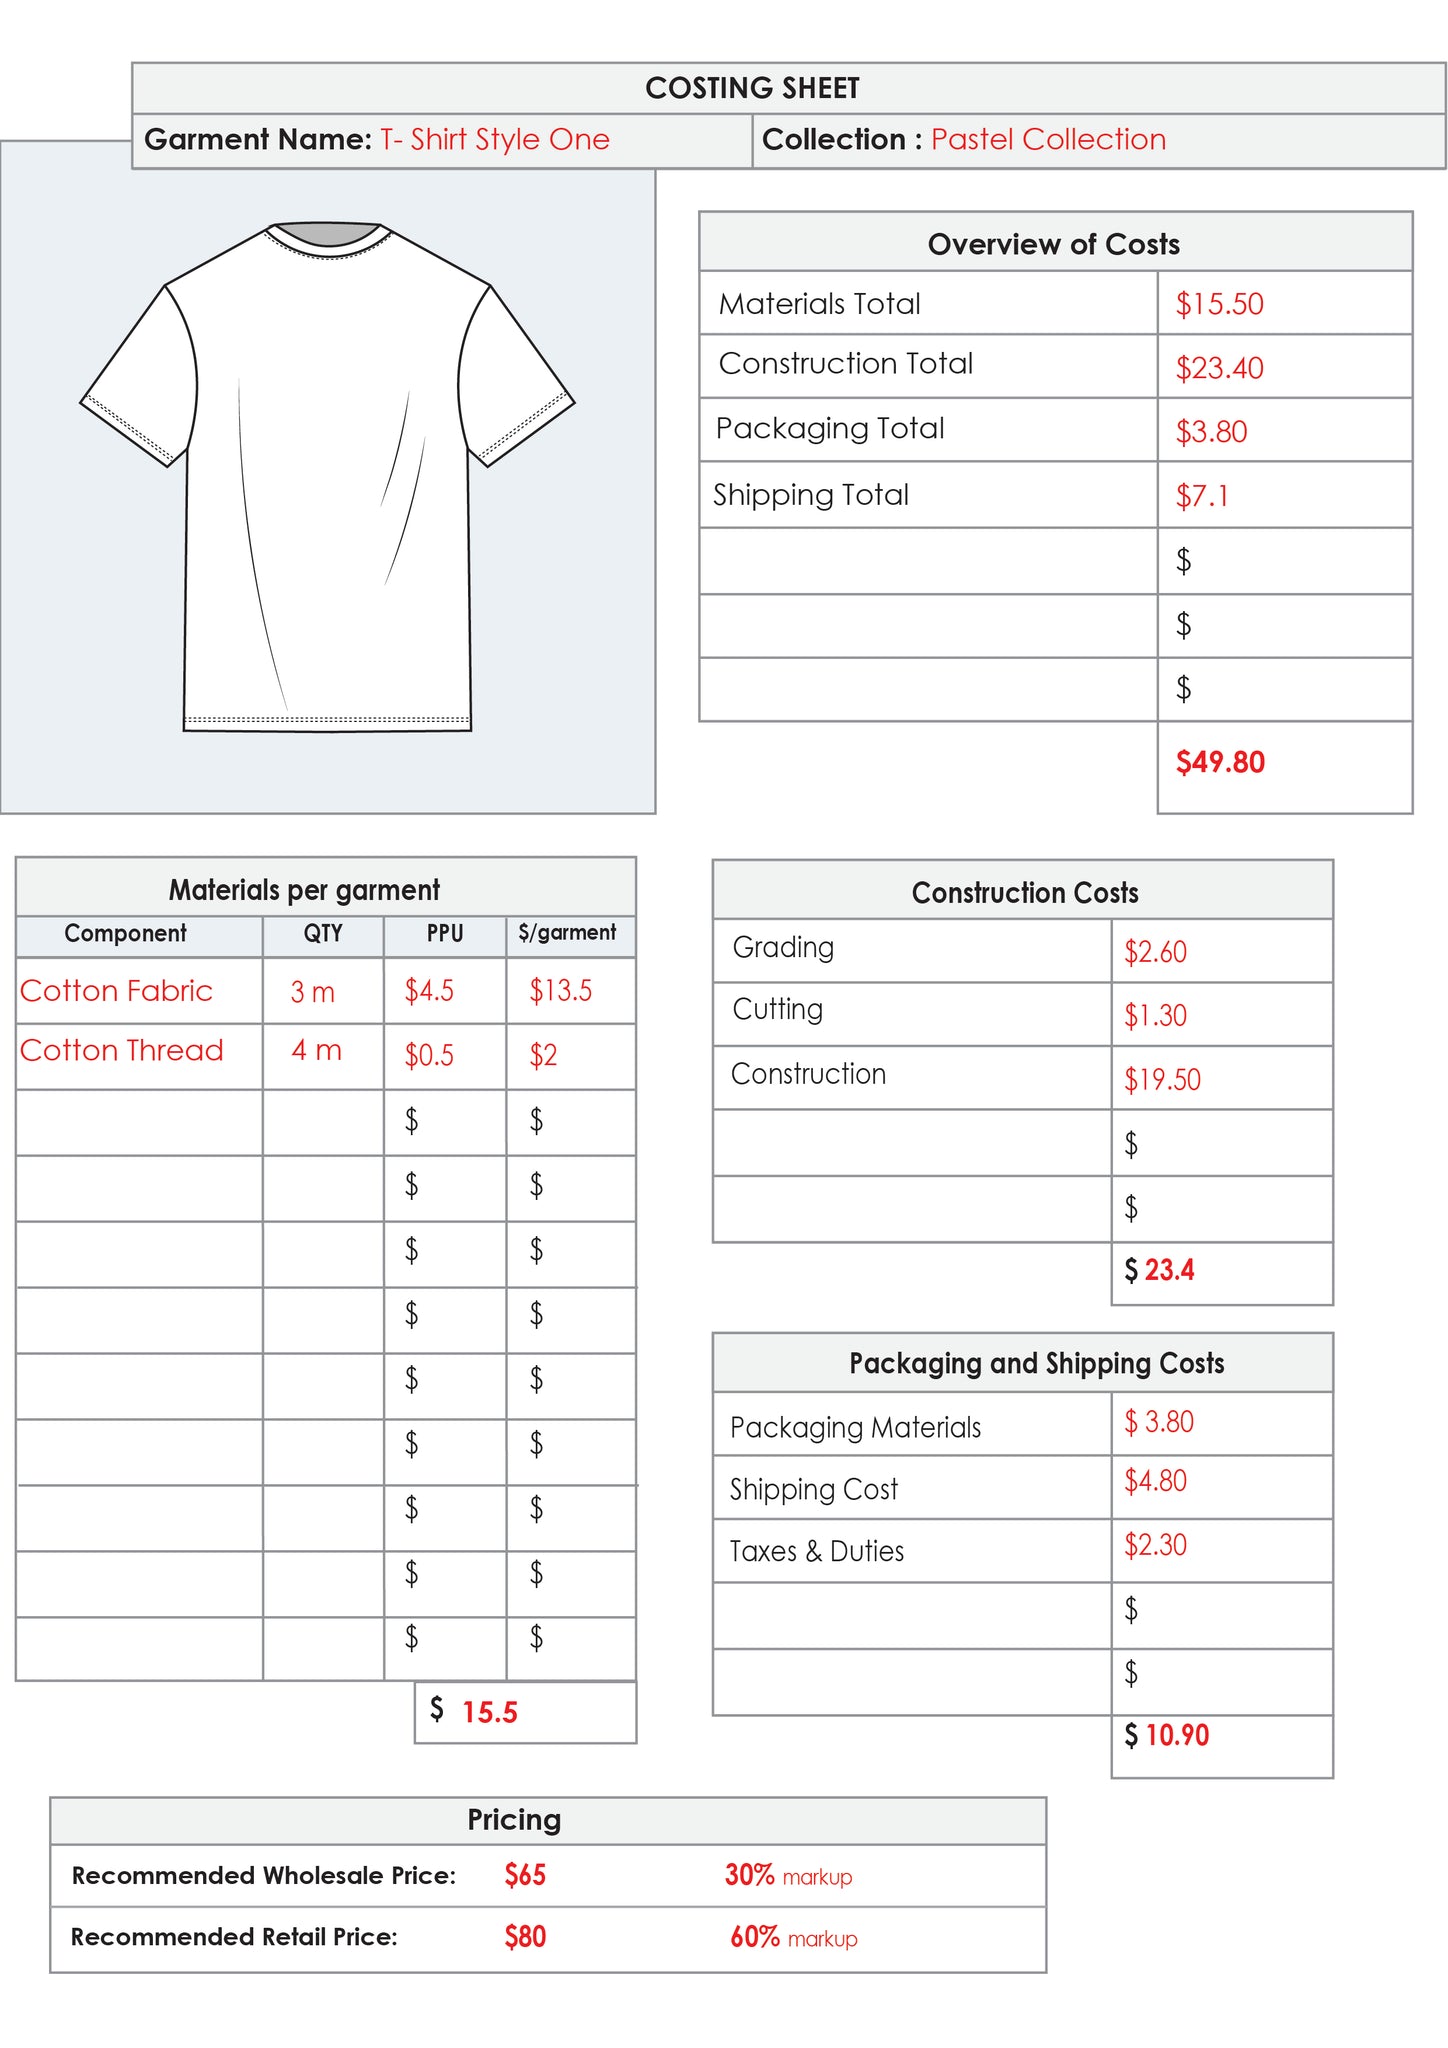 Fashion Costing Sheet Template